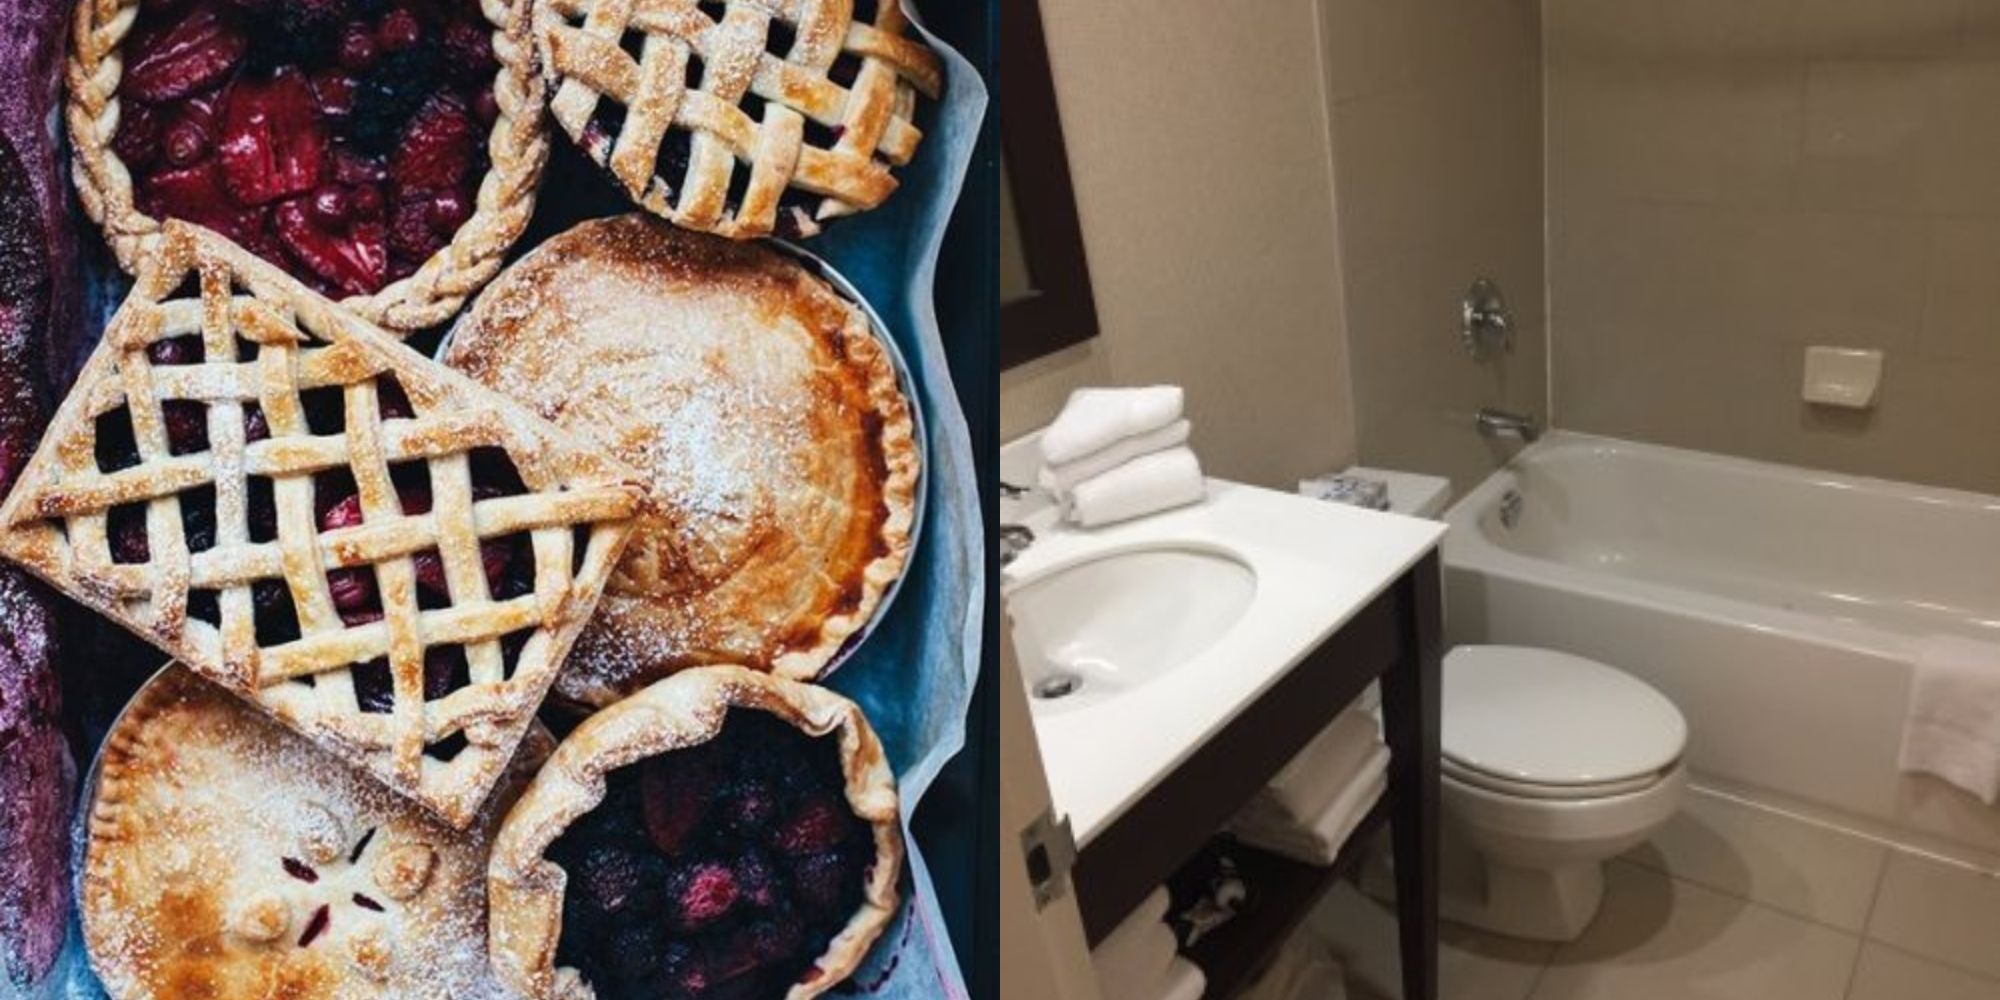 pies and hotel bathroom